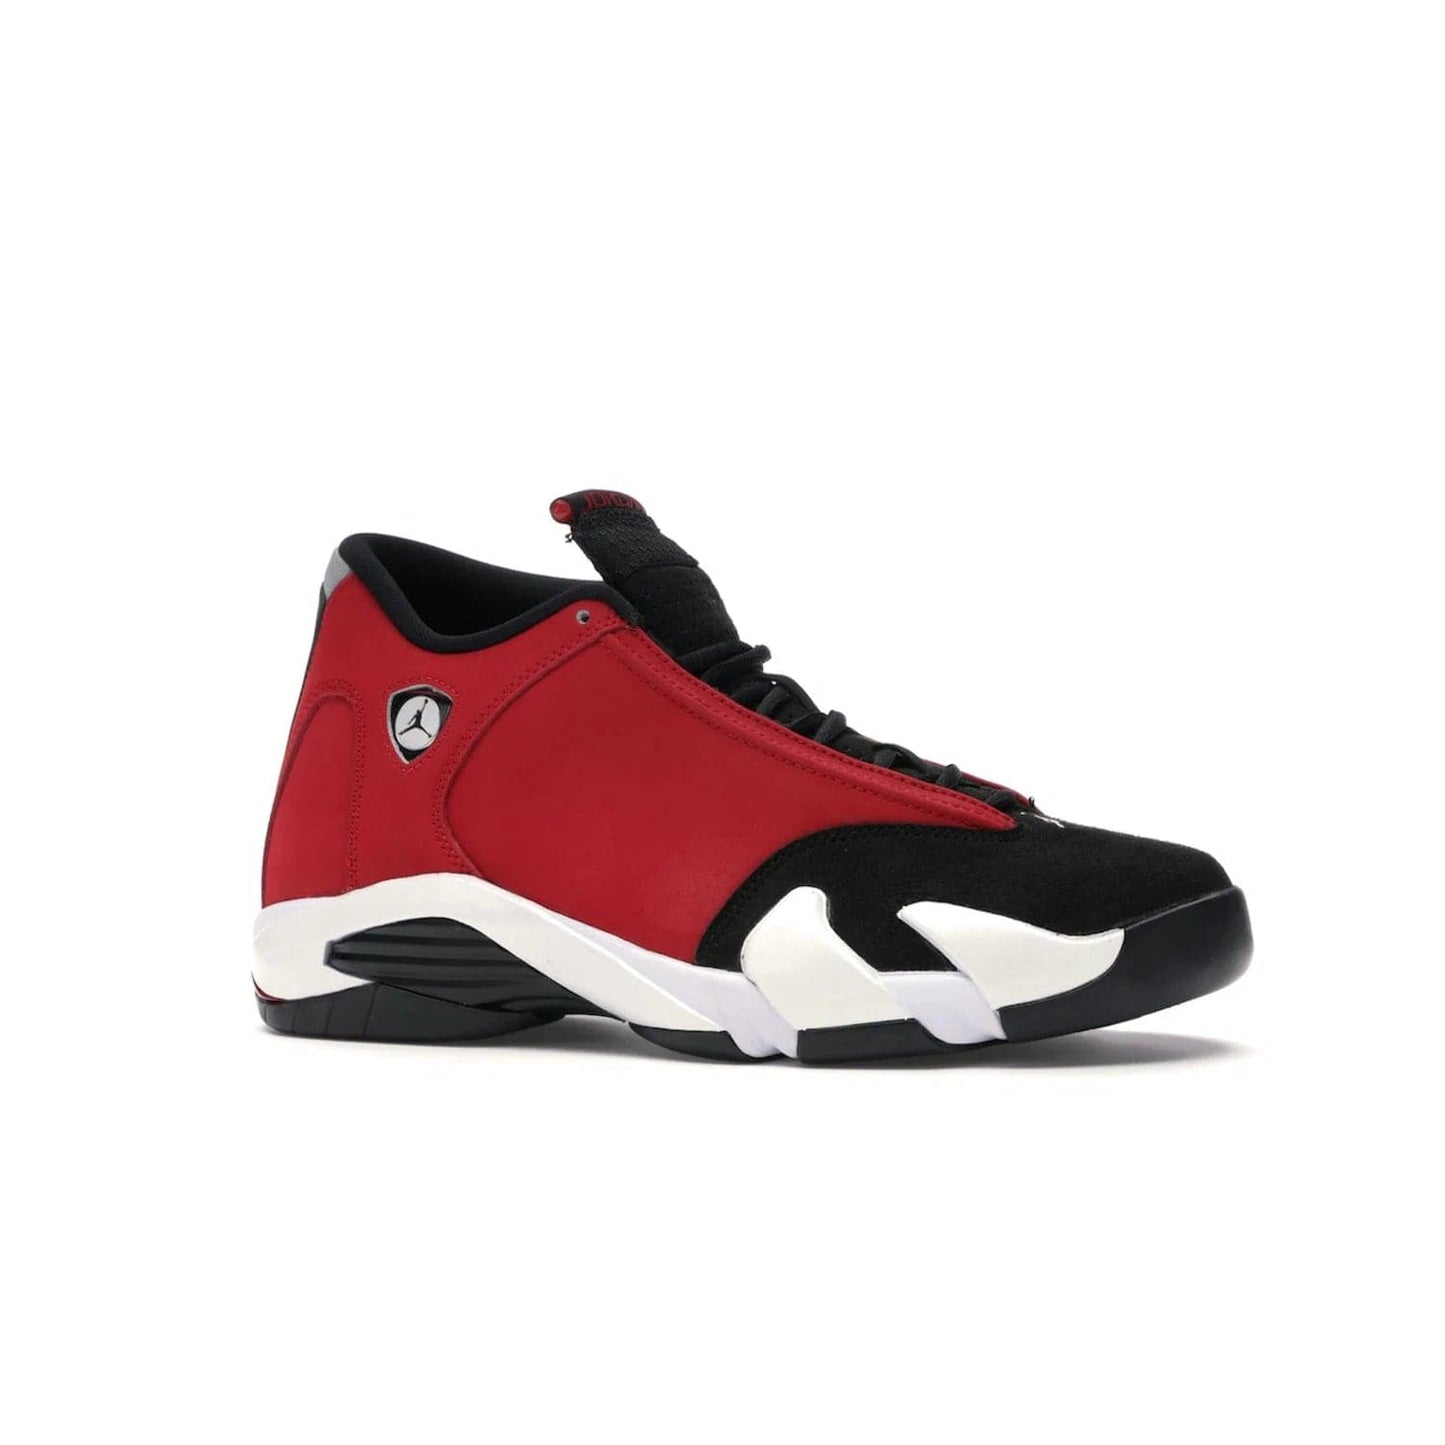 Jordan 14 Retro Gym Red Toro - Image 3 - Only at www.BallersClubKickz.com - Feel the Chicago Bulls energy with the Jordan 14 Retro Gym Red Toro! Black, red, and white design unites performance and fashion. Get your hands on this limited edition Jordan and show off your style today.